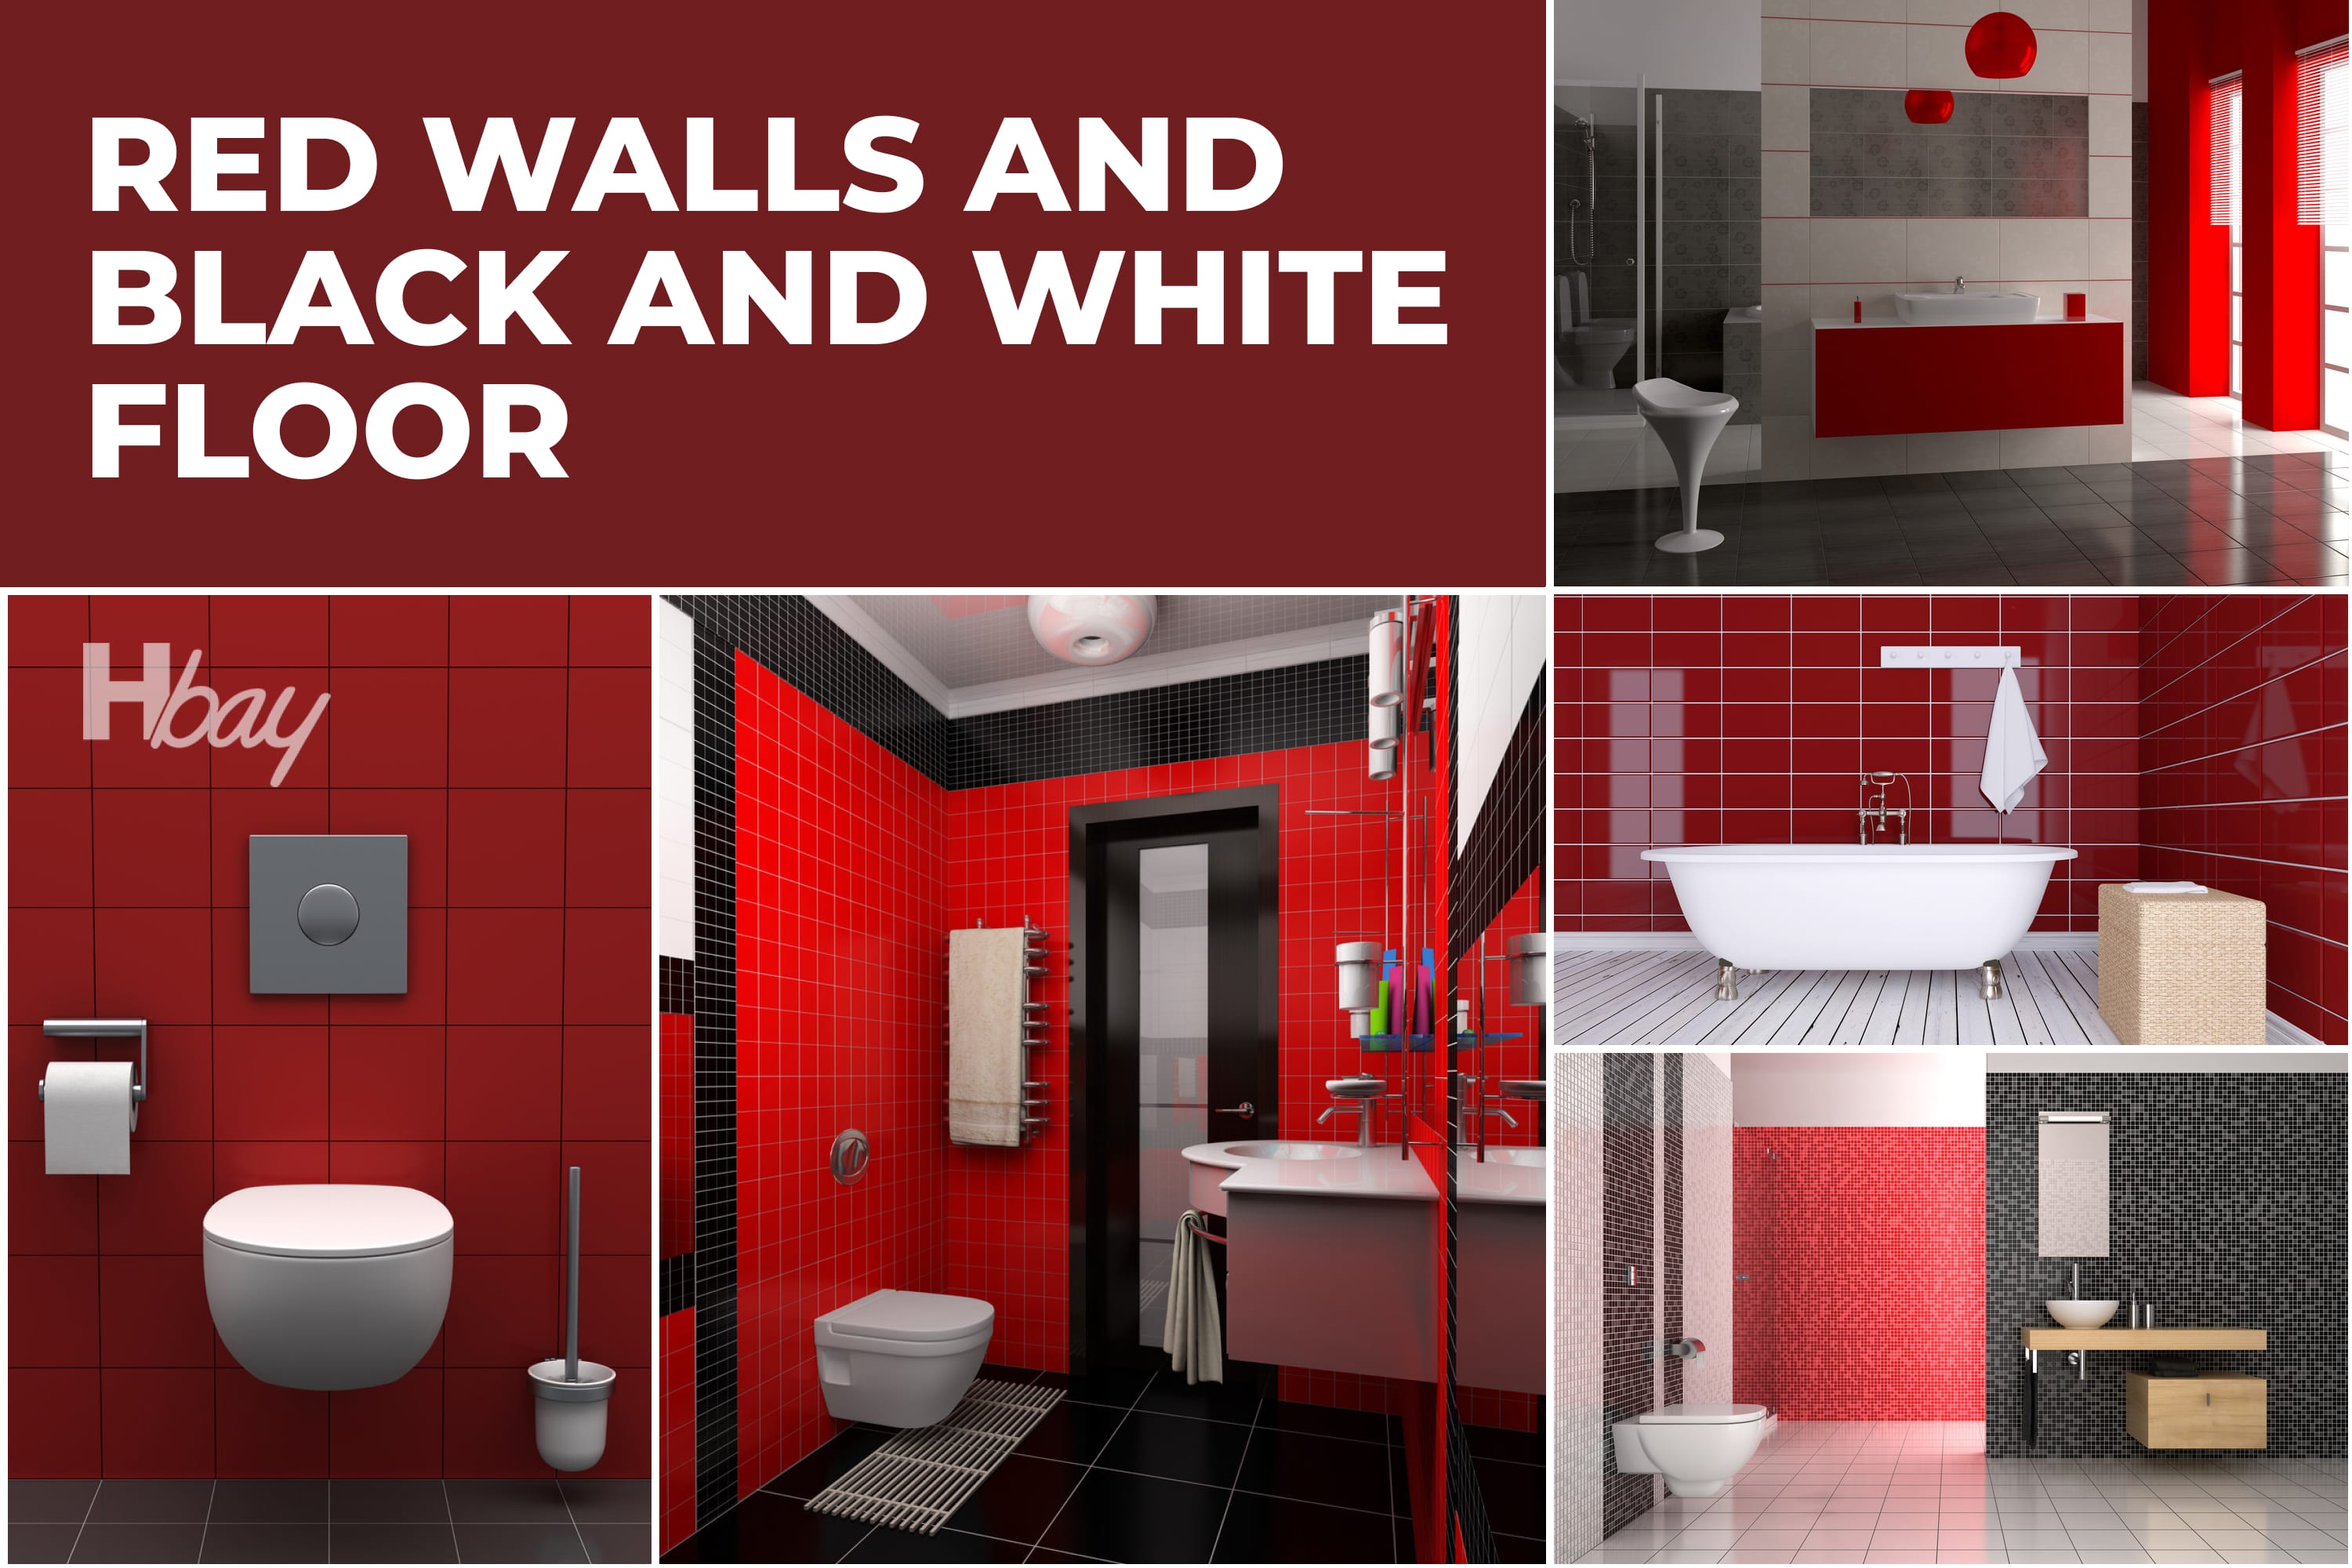 Red walls and black and white floor